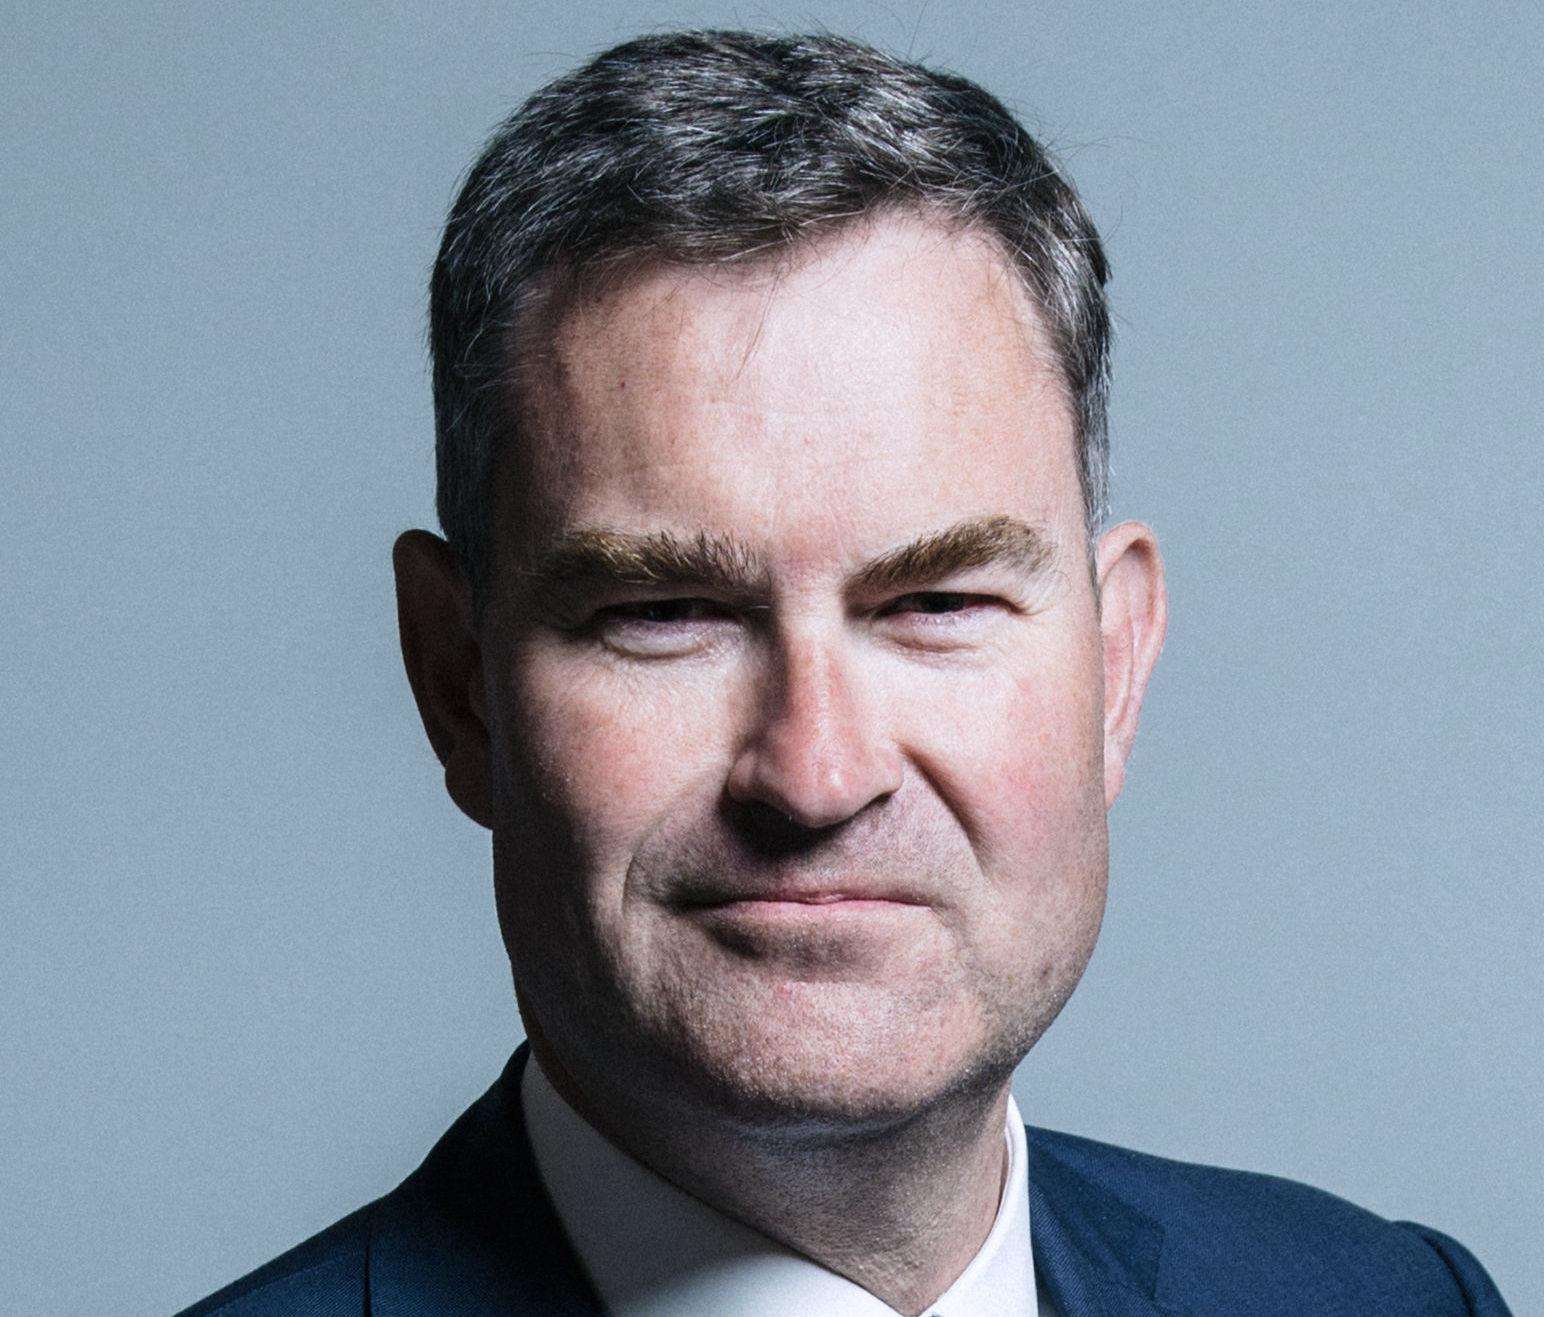 David Gauke, Secretary of State for Justice, has been warned the failure to fund provisions would be a 'very public failure'